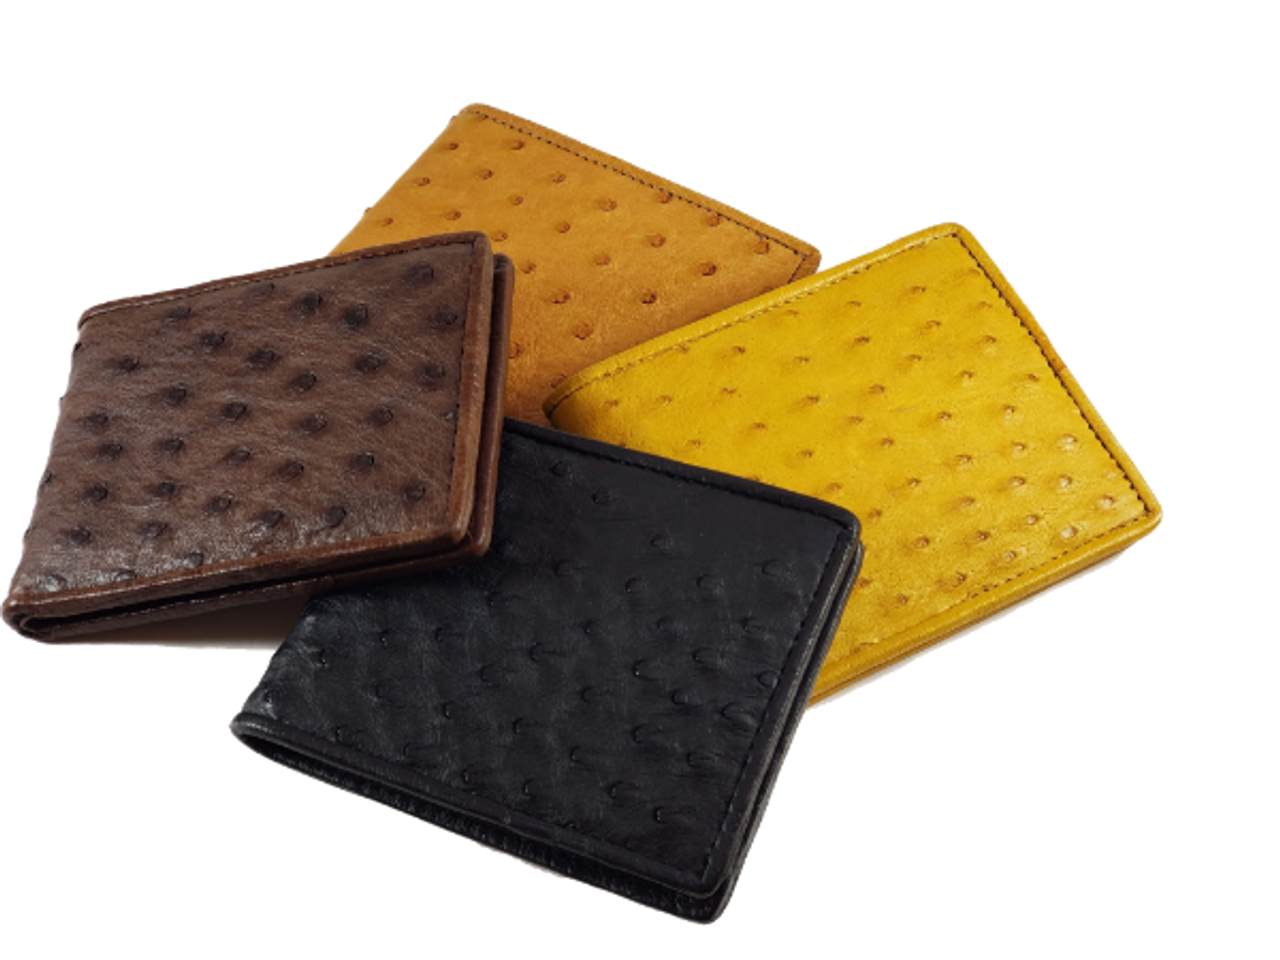 Agustine, Ostrich Leather Quick Card Access Wallet